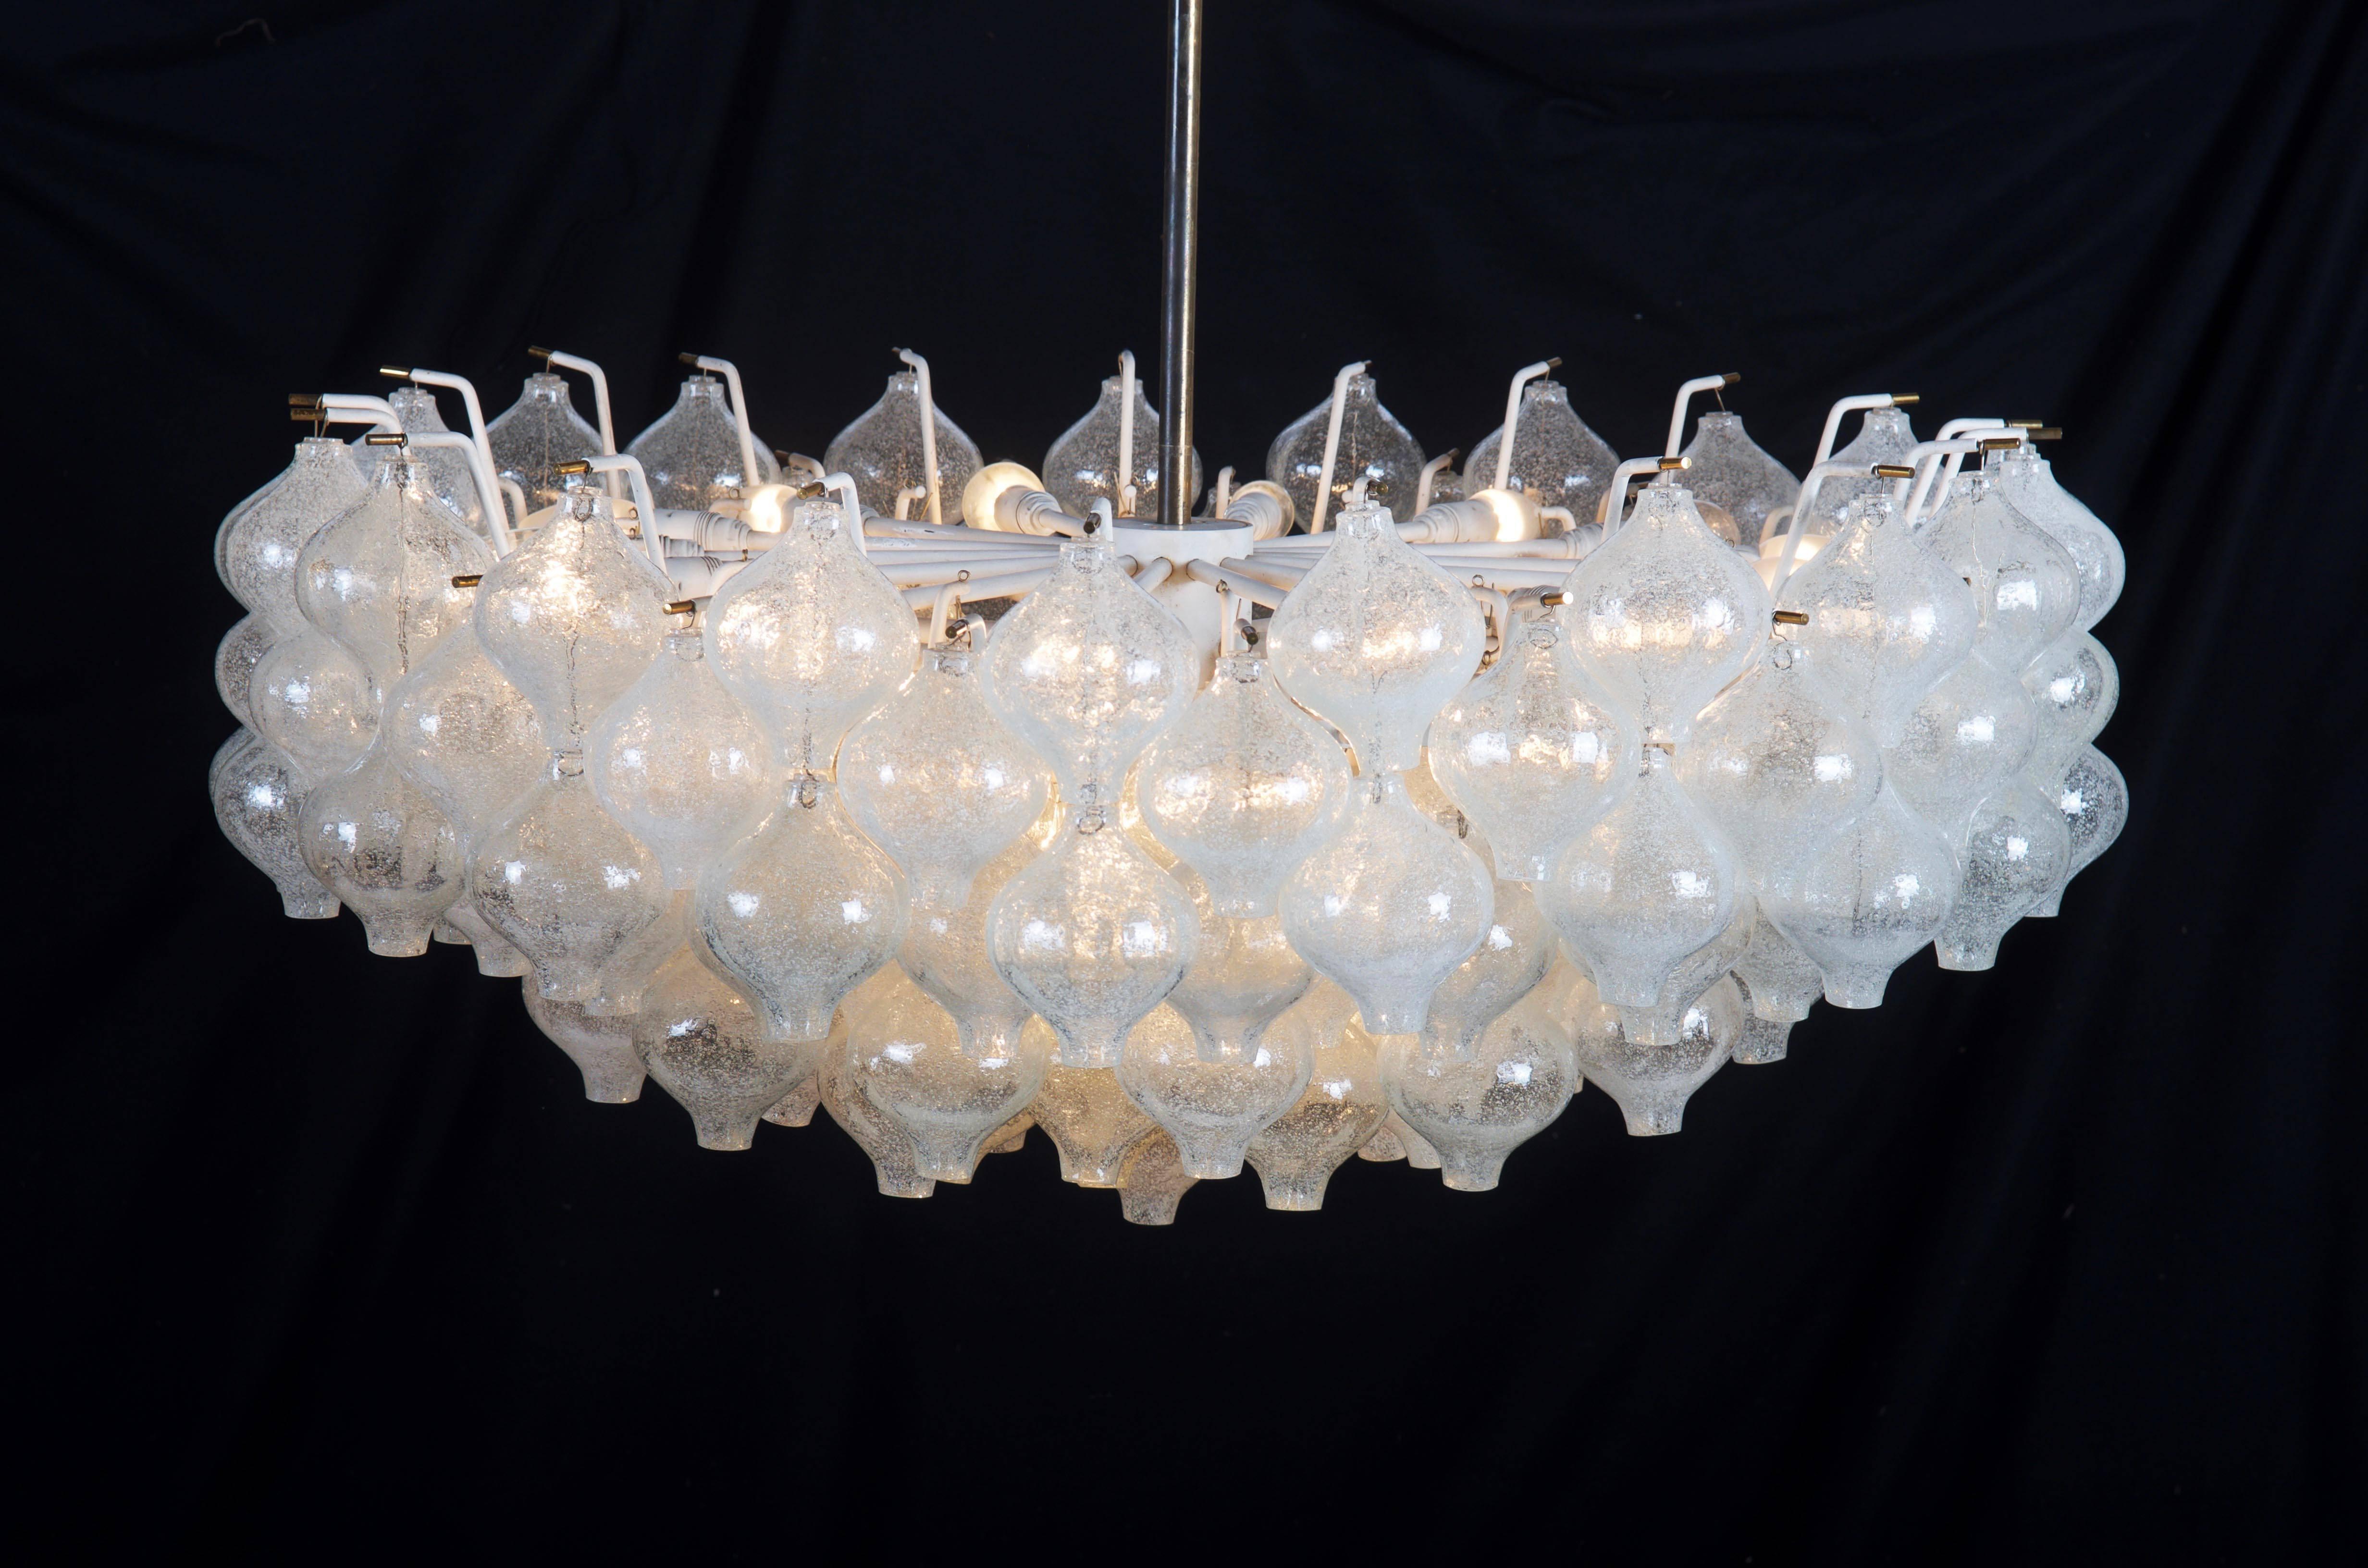 Imposing chandelier manufactured by Kalmar in Vienna in the 1960s.
Brass frame white enameled with 155 handblown art glass balls. Fitted with 28 E14 sockets up to 40W each. Original condition with some patina on steel parts, electric has to be